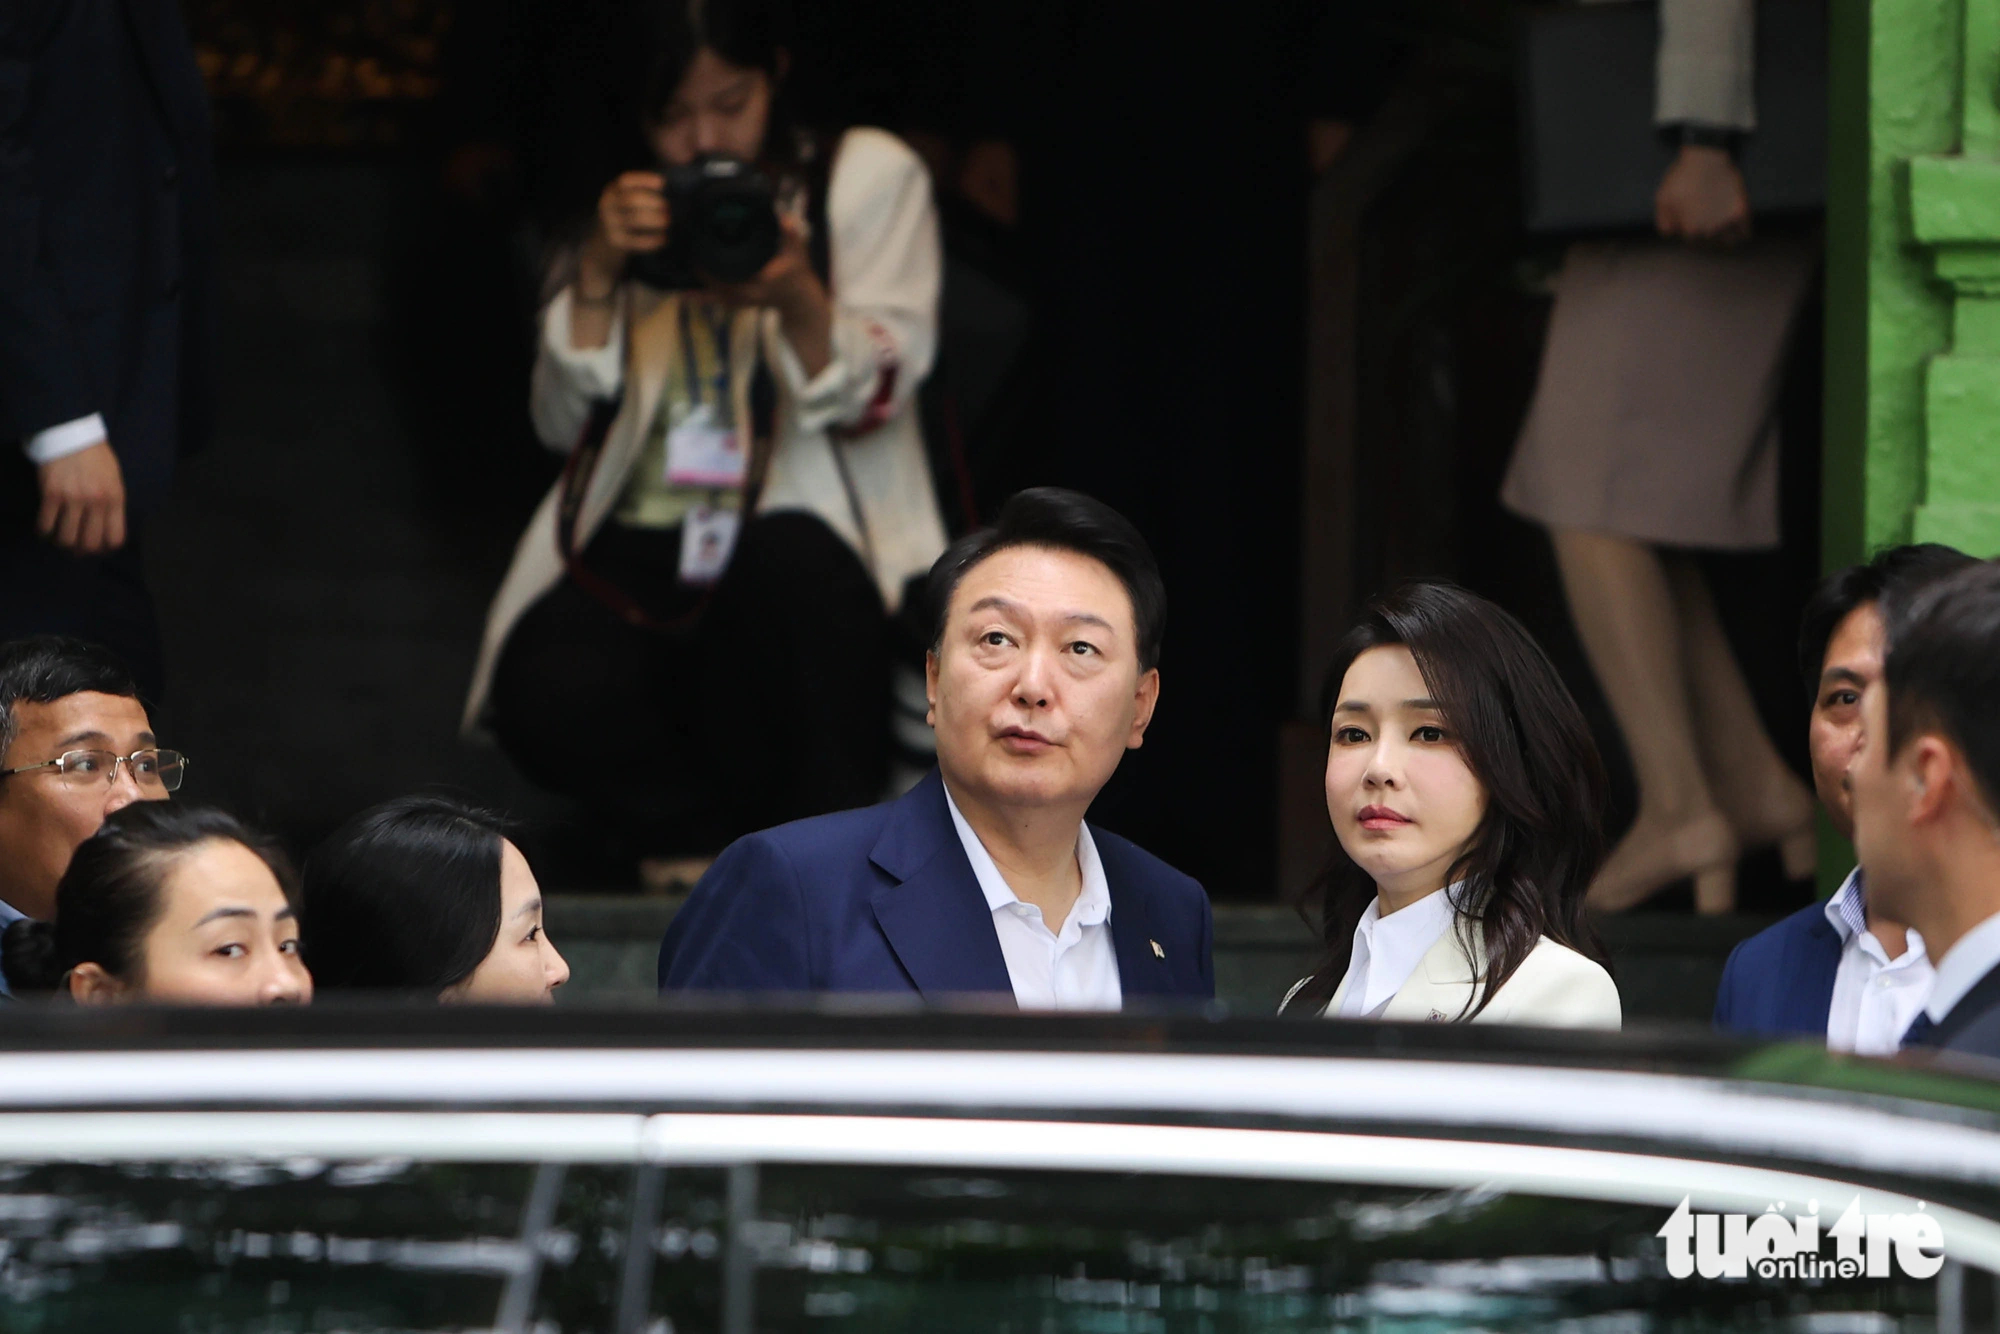 South Korean President Yoon Suk Yeol and his spouse Kim Keon Hee arrive at Luc Thuy Restaurant in Hanoi’s Hoan Kiem District to have breakfast with Vietnamese State President VO Van Thuong and his spouse on June 24, 2023. Photo: Nguyen Khanh / Tuoi Tre